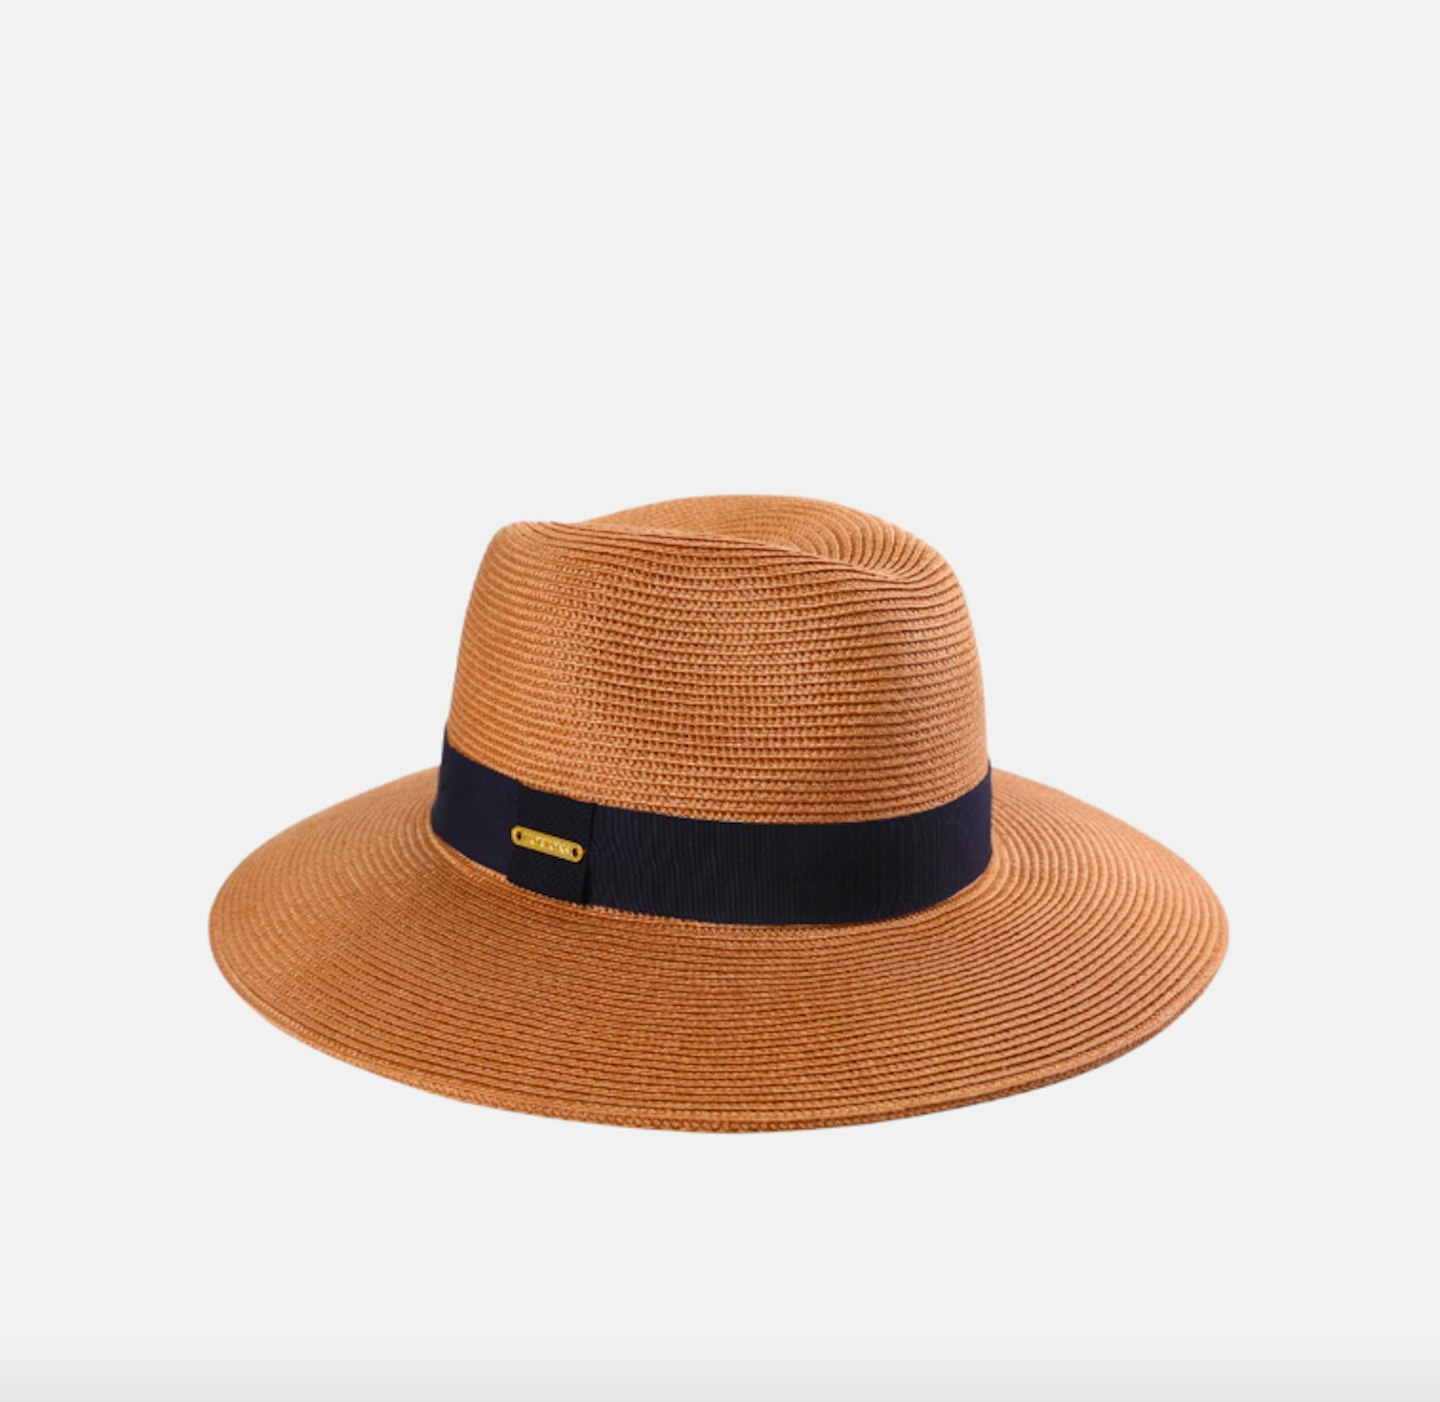 Hortons England, Seaford Fedora Hat, WAS £79 NOW £63.20